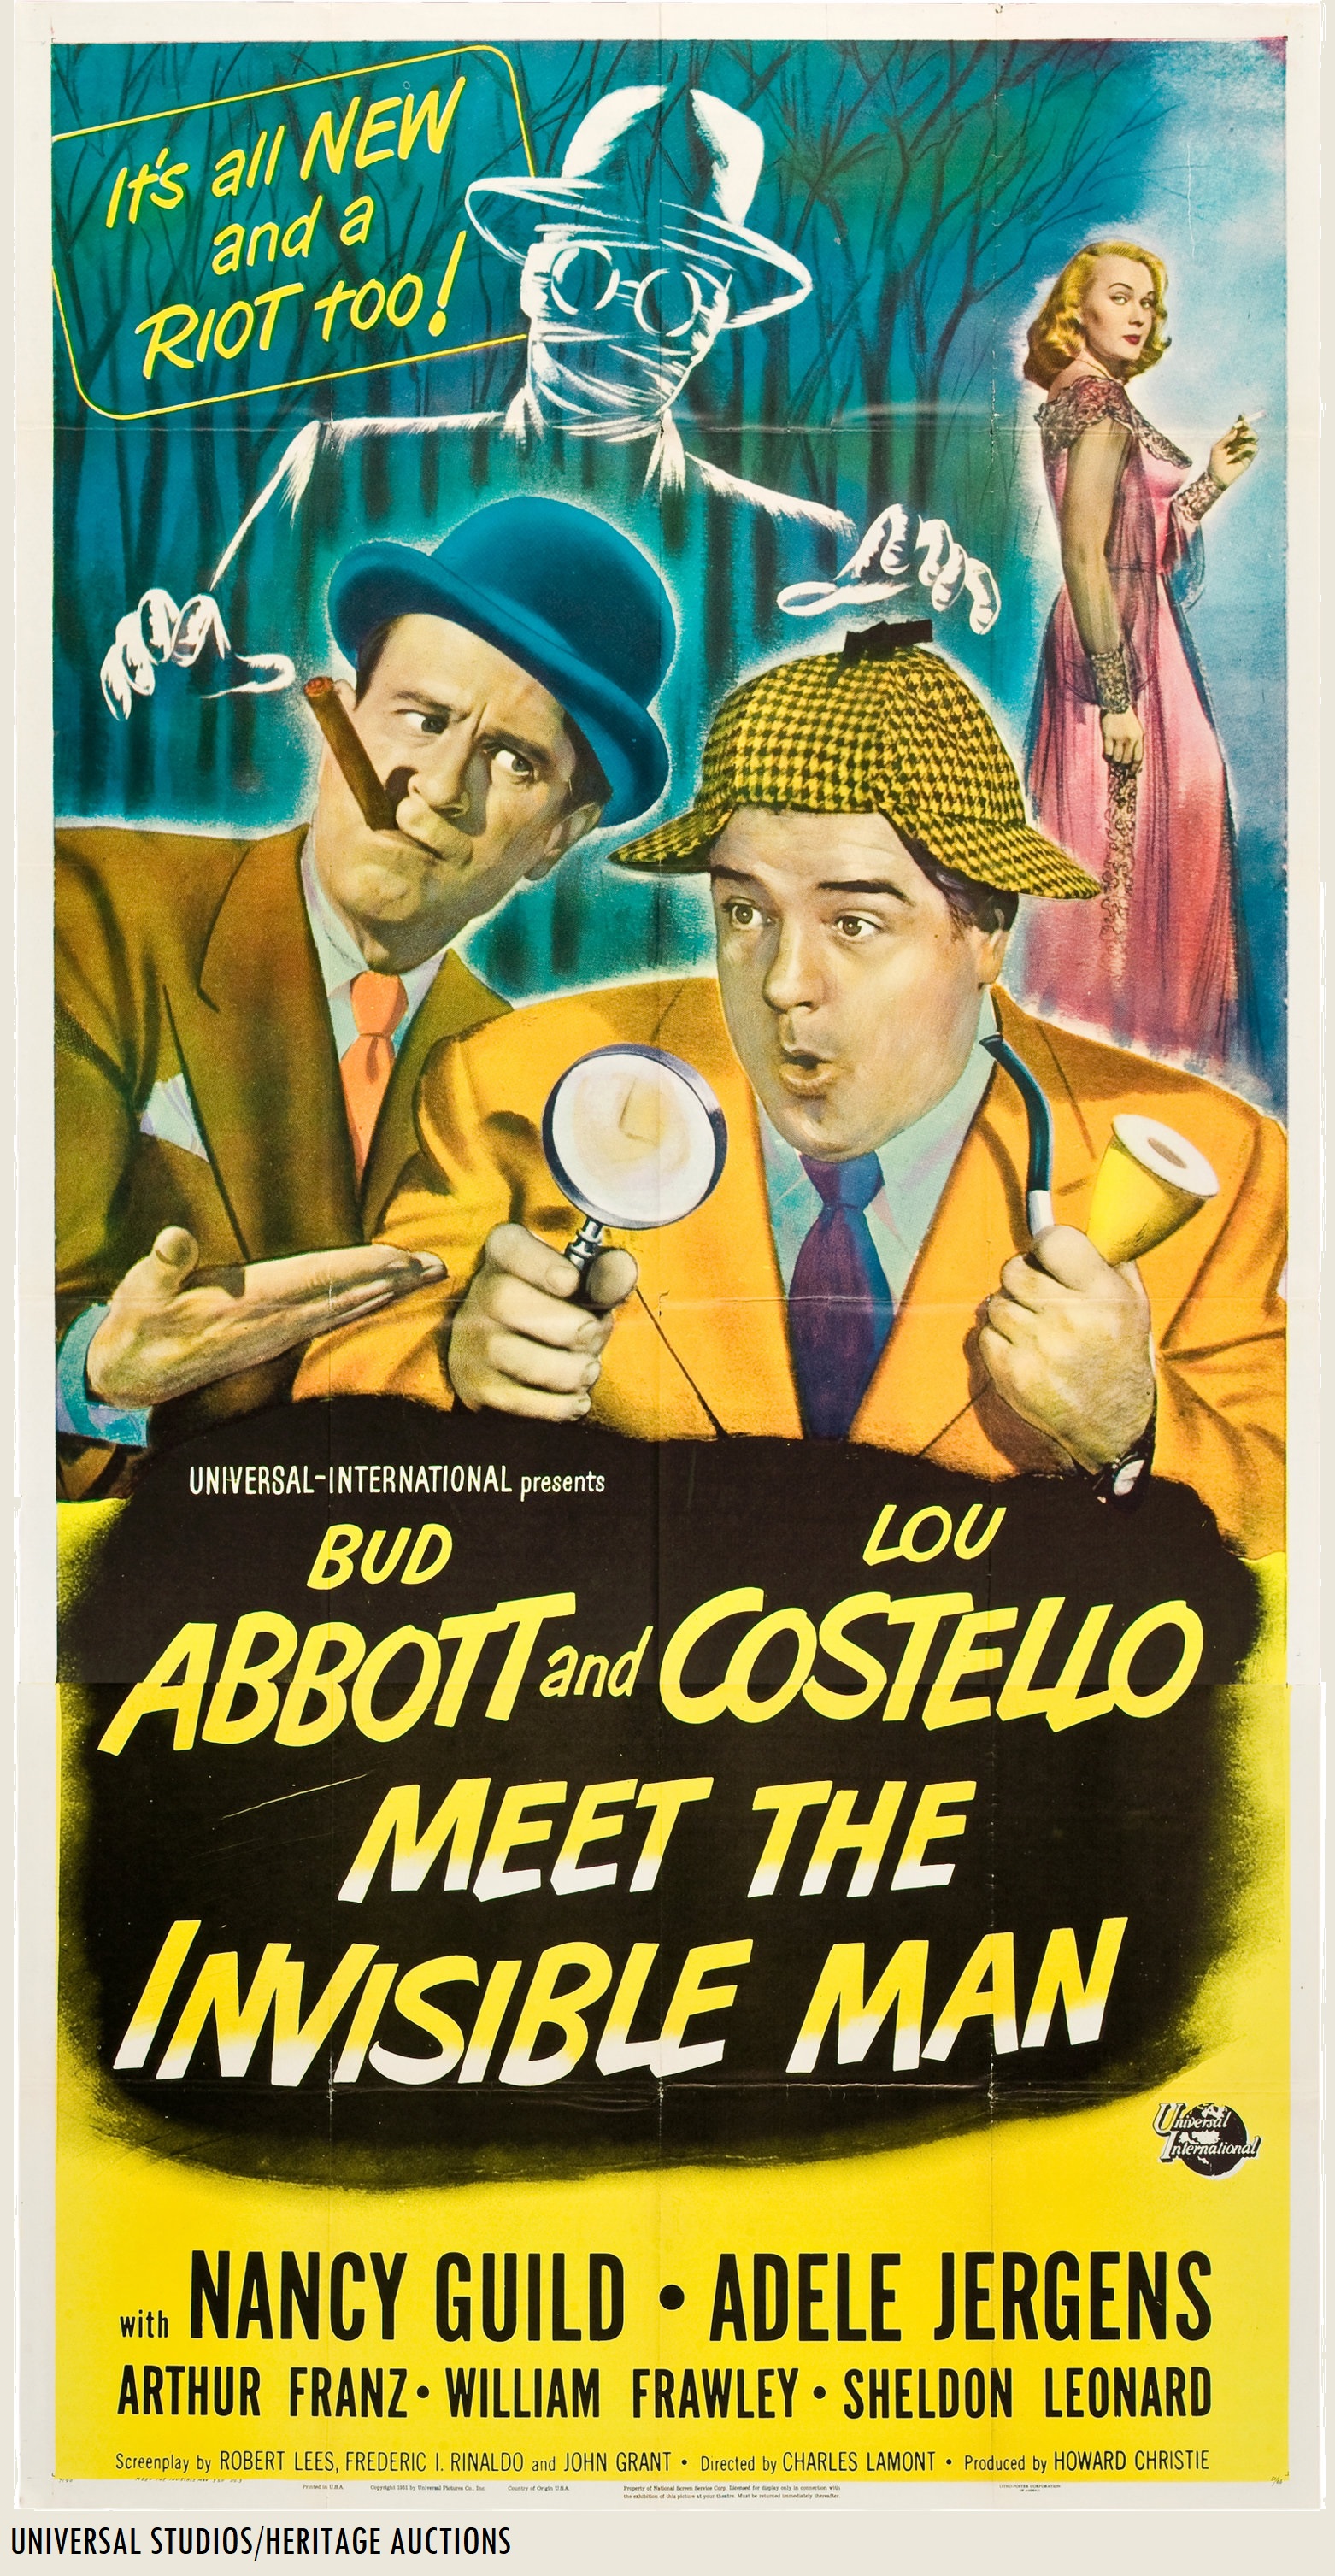 Original_1951_Universal_Studios_Theatrical_Poster_Art_Element_Abbott_And_Costello_Meet_The_Invisible_Man